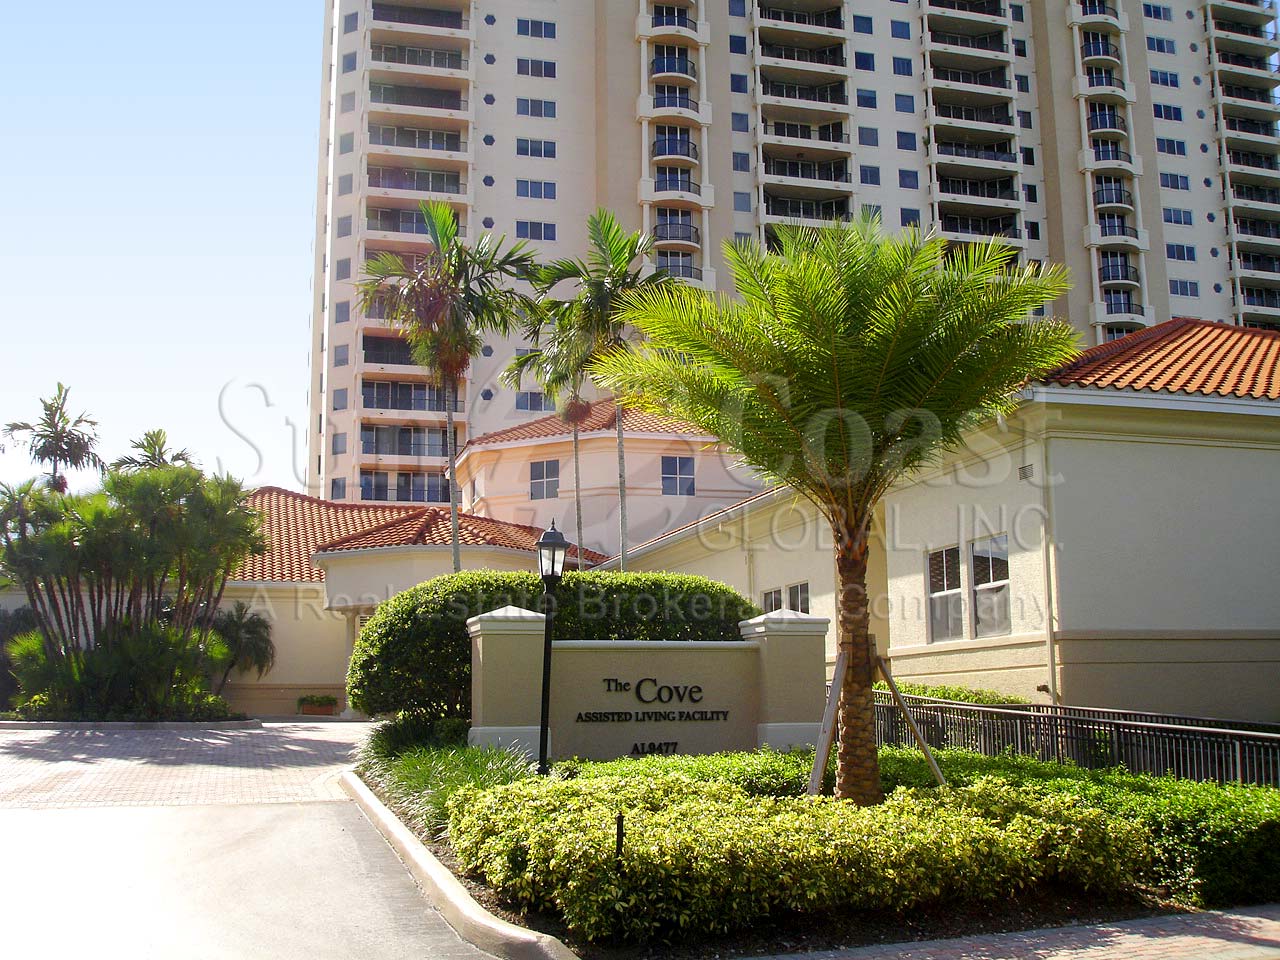 Marbella Condominium Building and The Cove - Assisted Living Facility